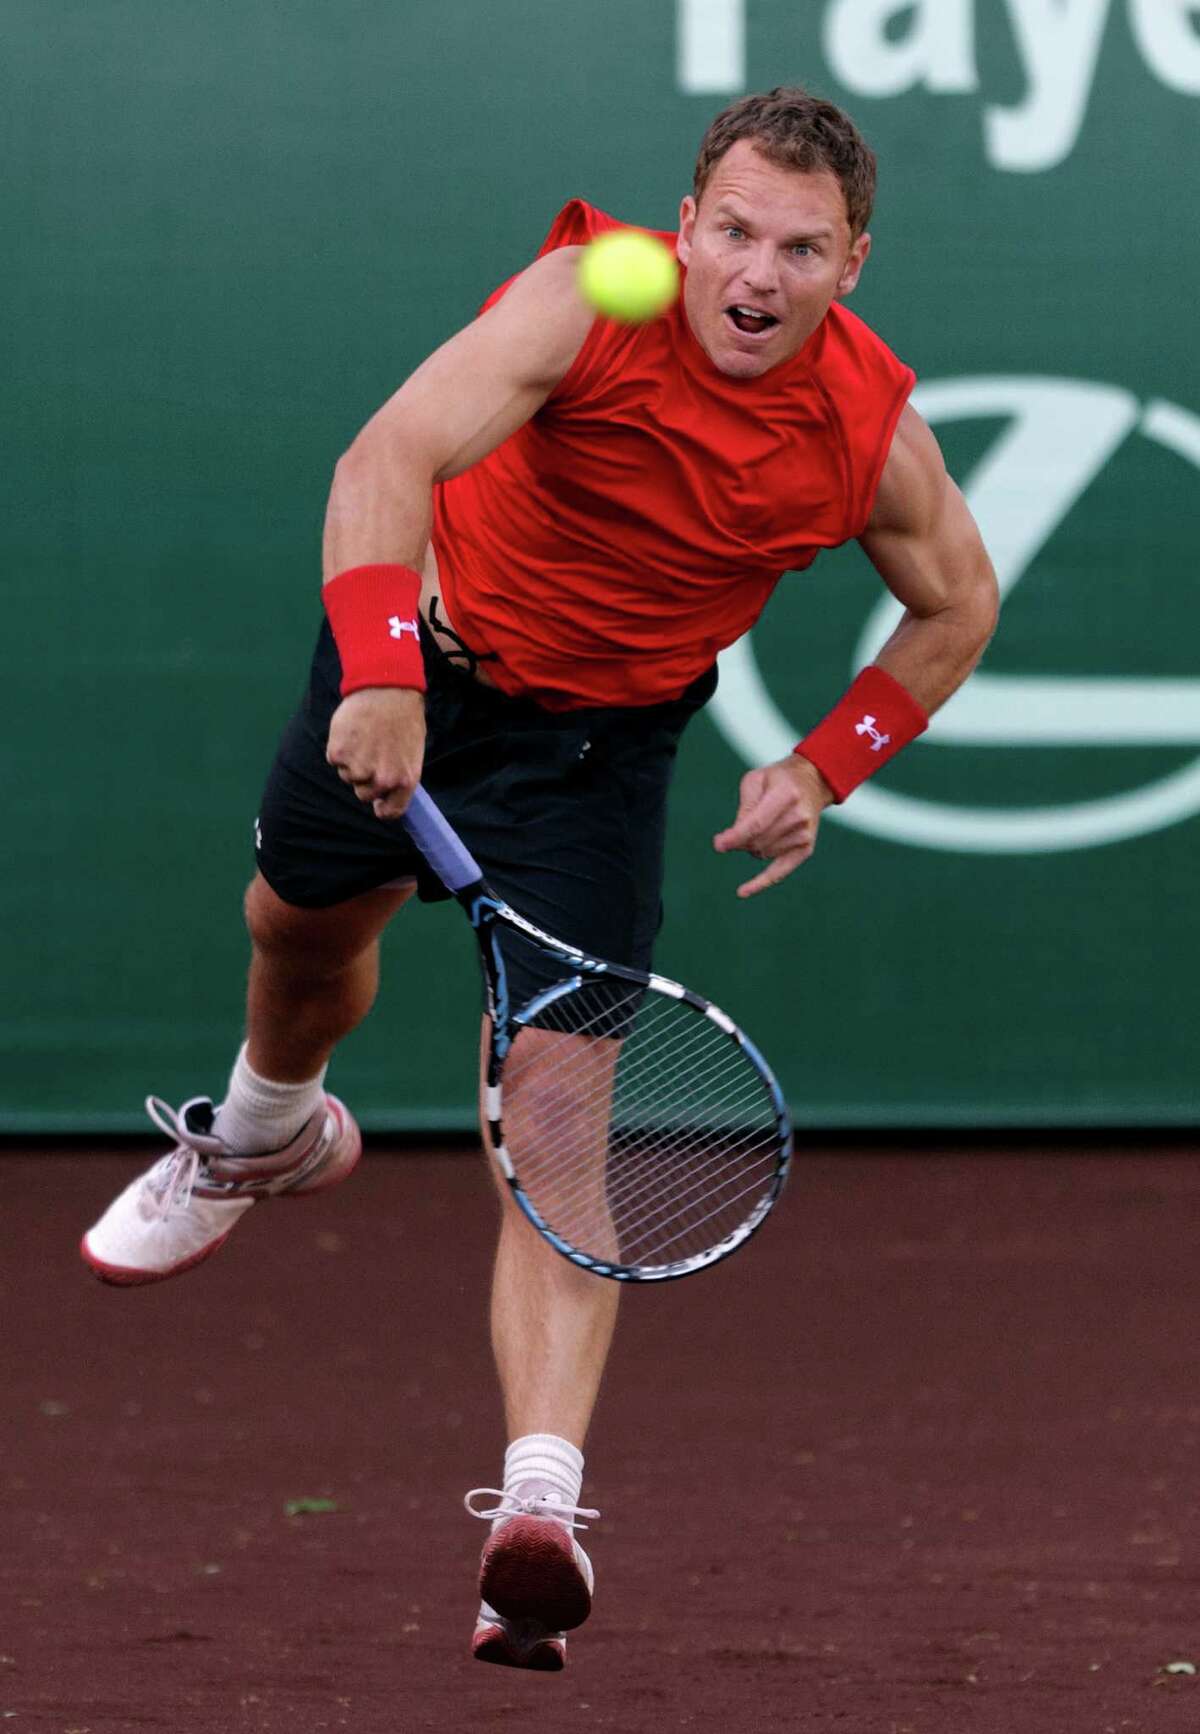 andreev tennis winner still houston serves igor russell clay court match michael mens during won monday april